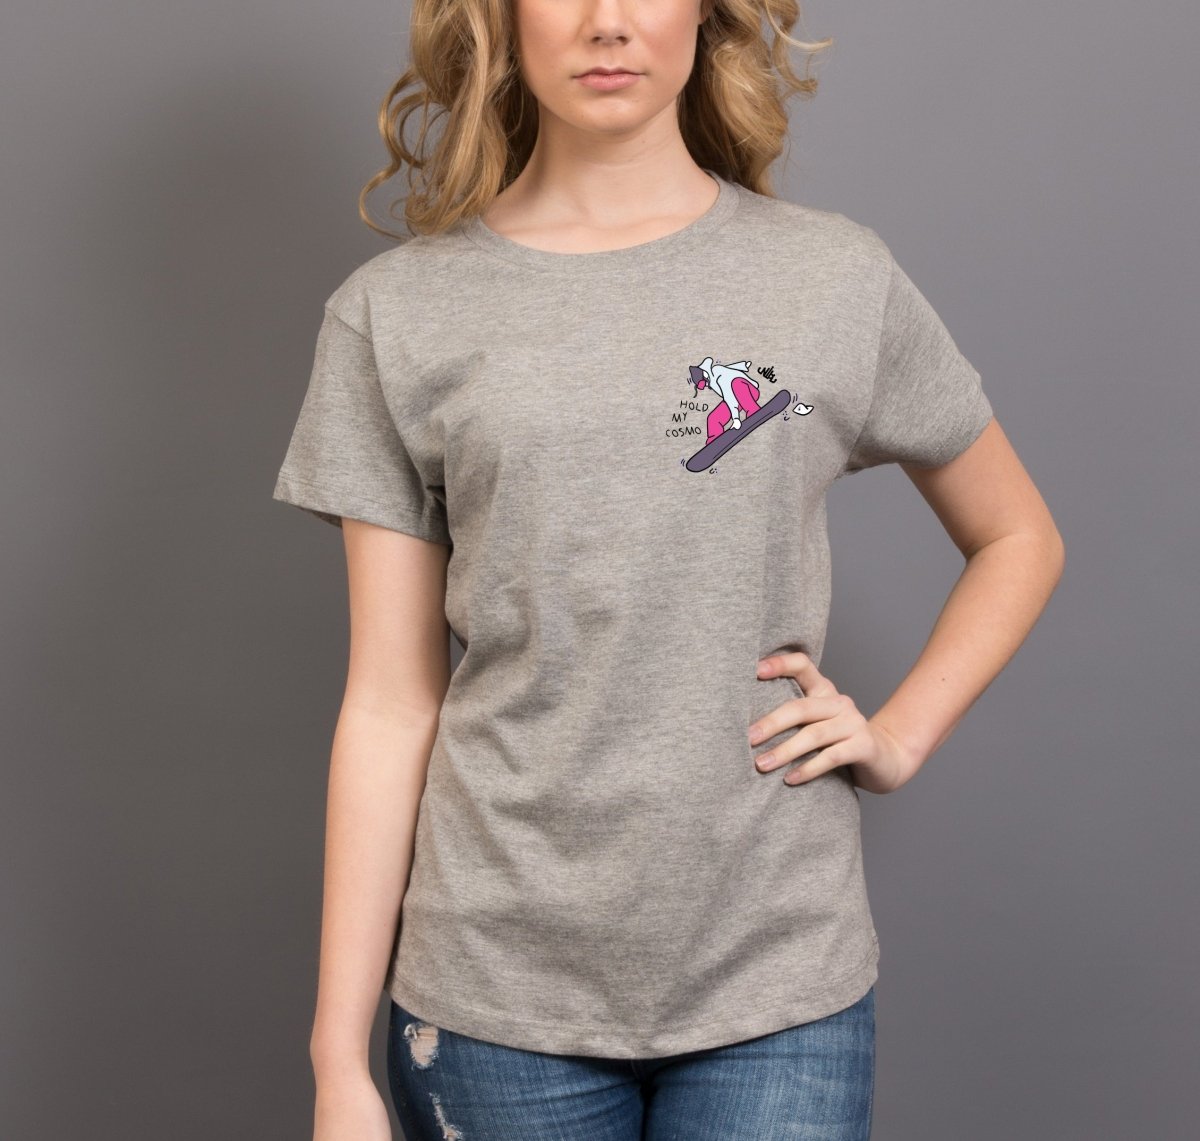 Hold My Cosmo Snowboarder Tee - Nobody's Princess